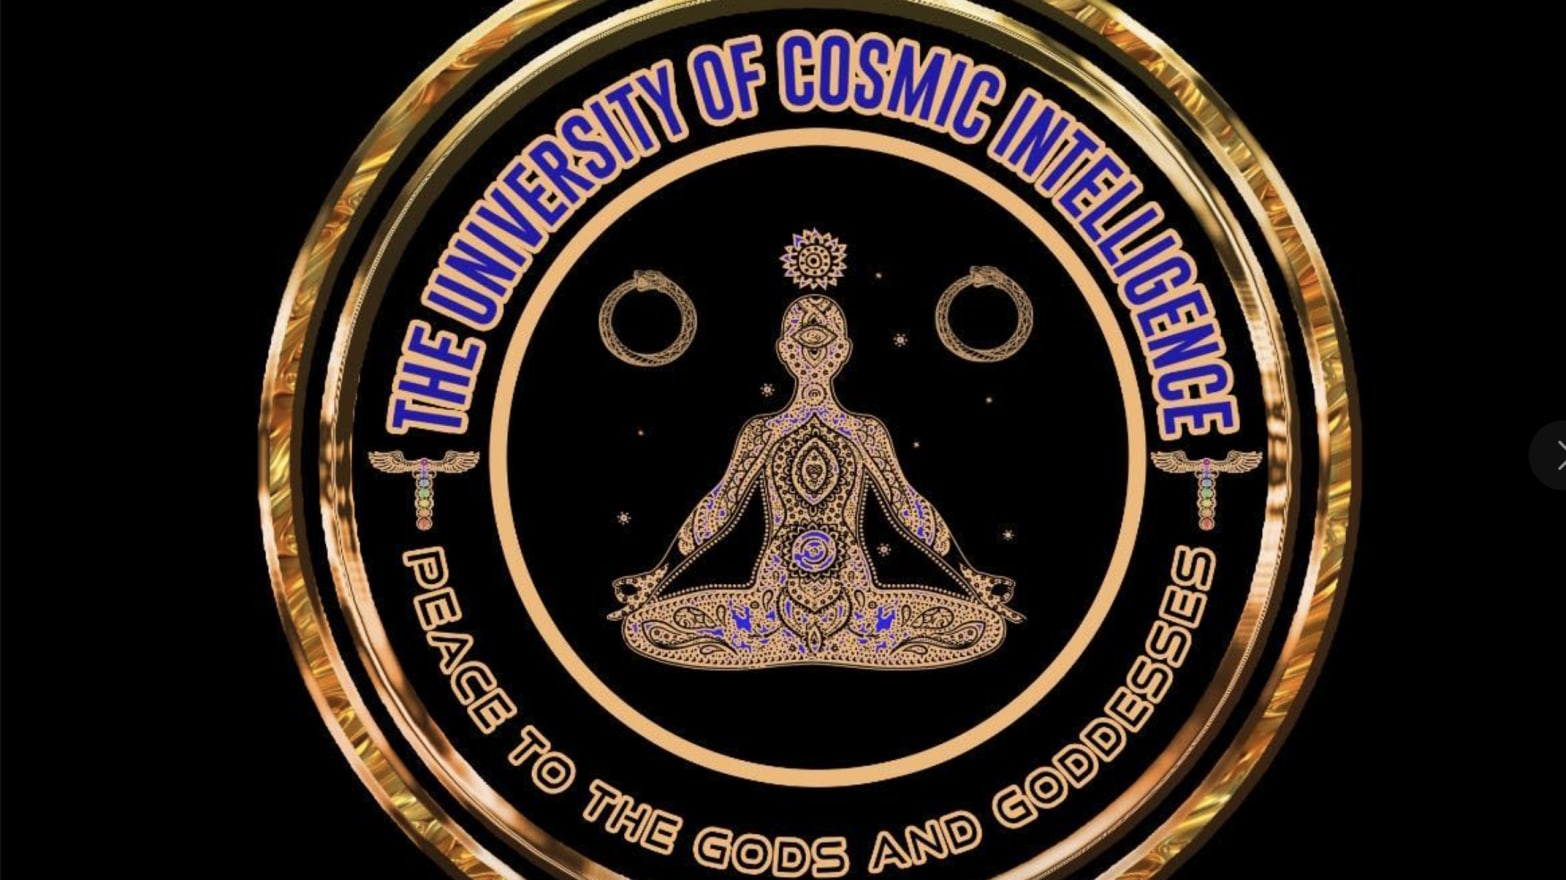 The logo of the so-called University of Cosmic Intelligence, which alleged cult leader Rashad Jamal uses to preach to followers online from behind bars. 